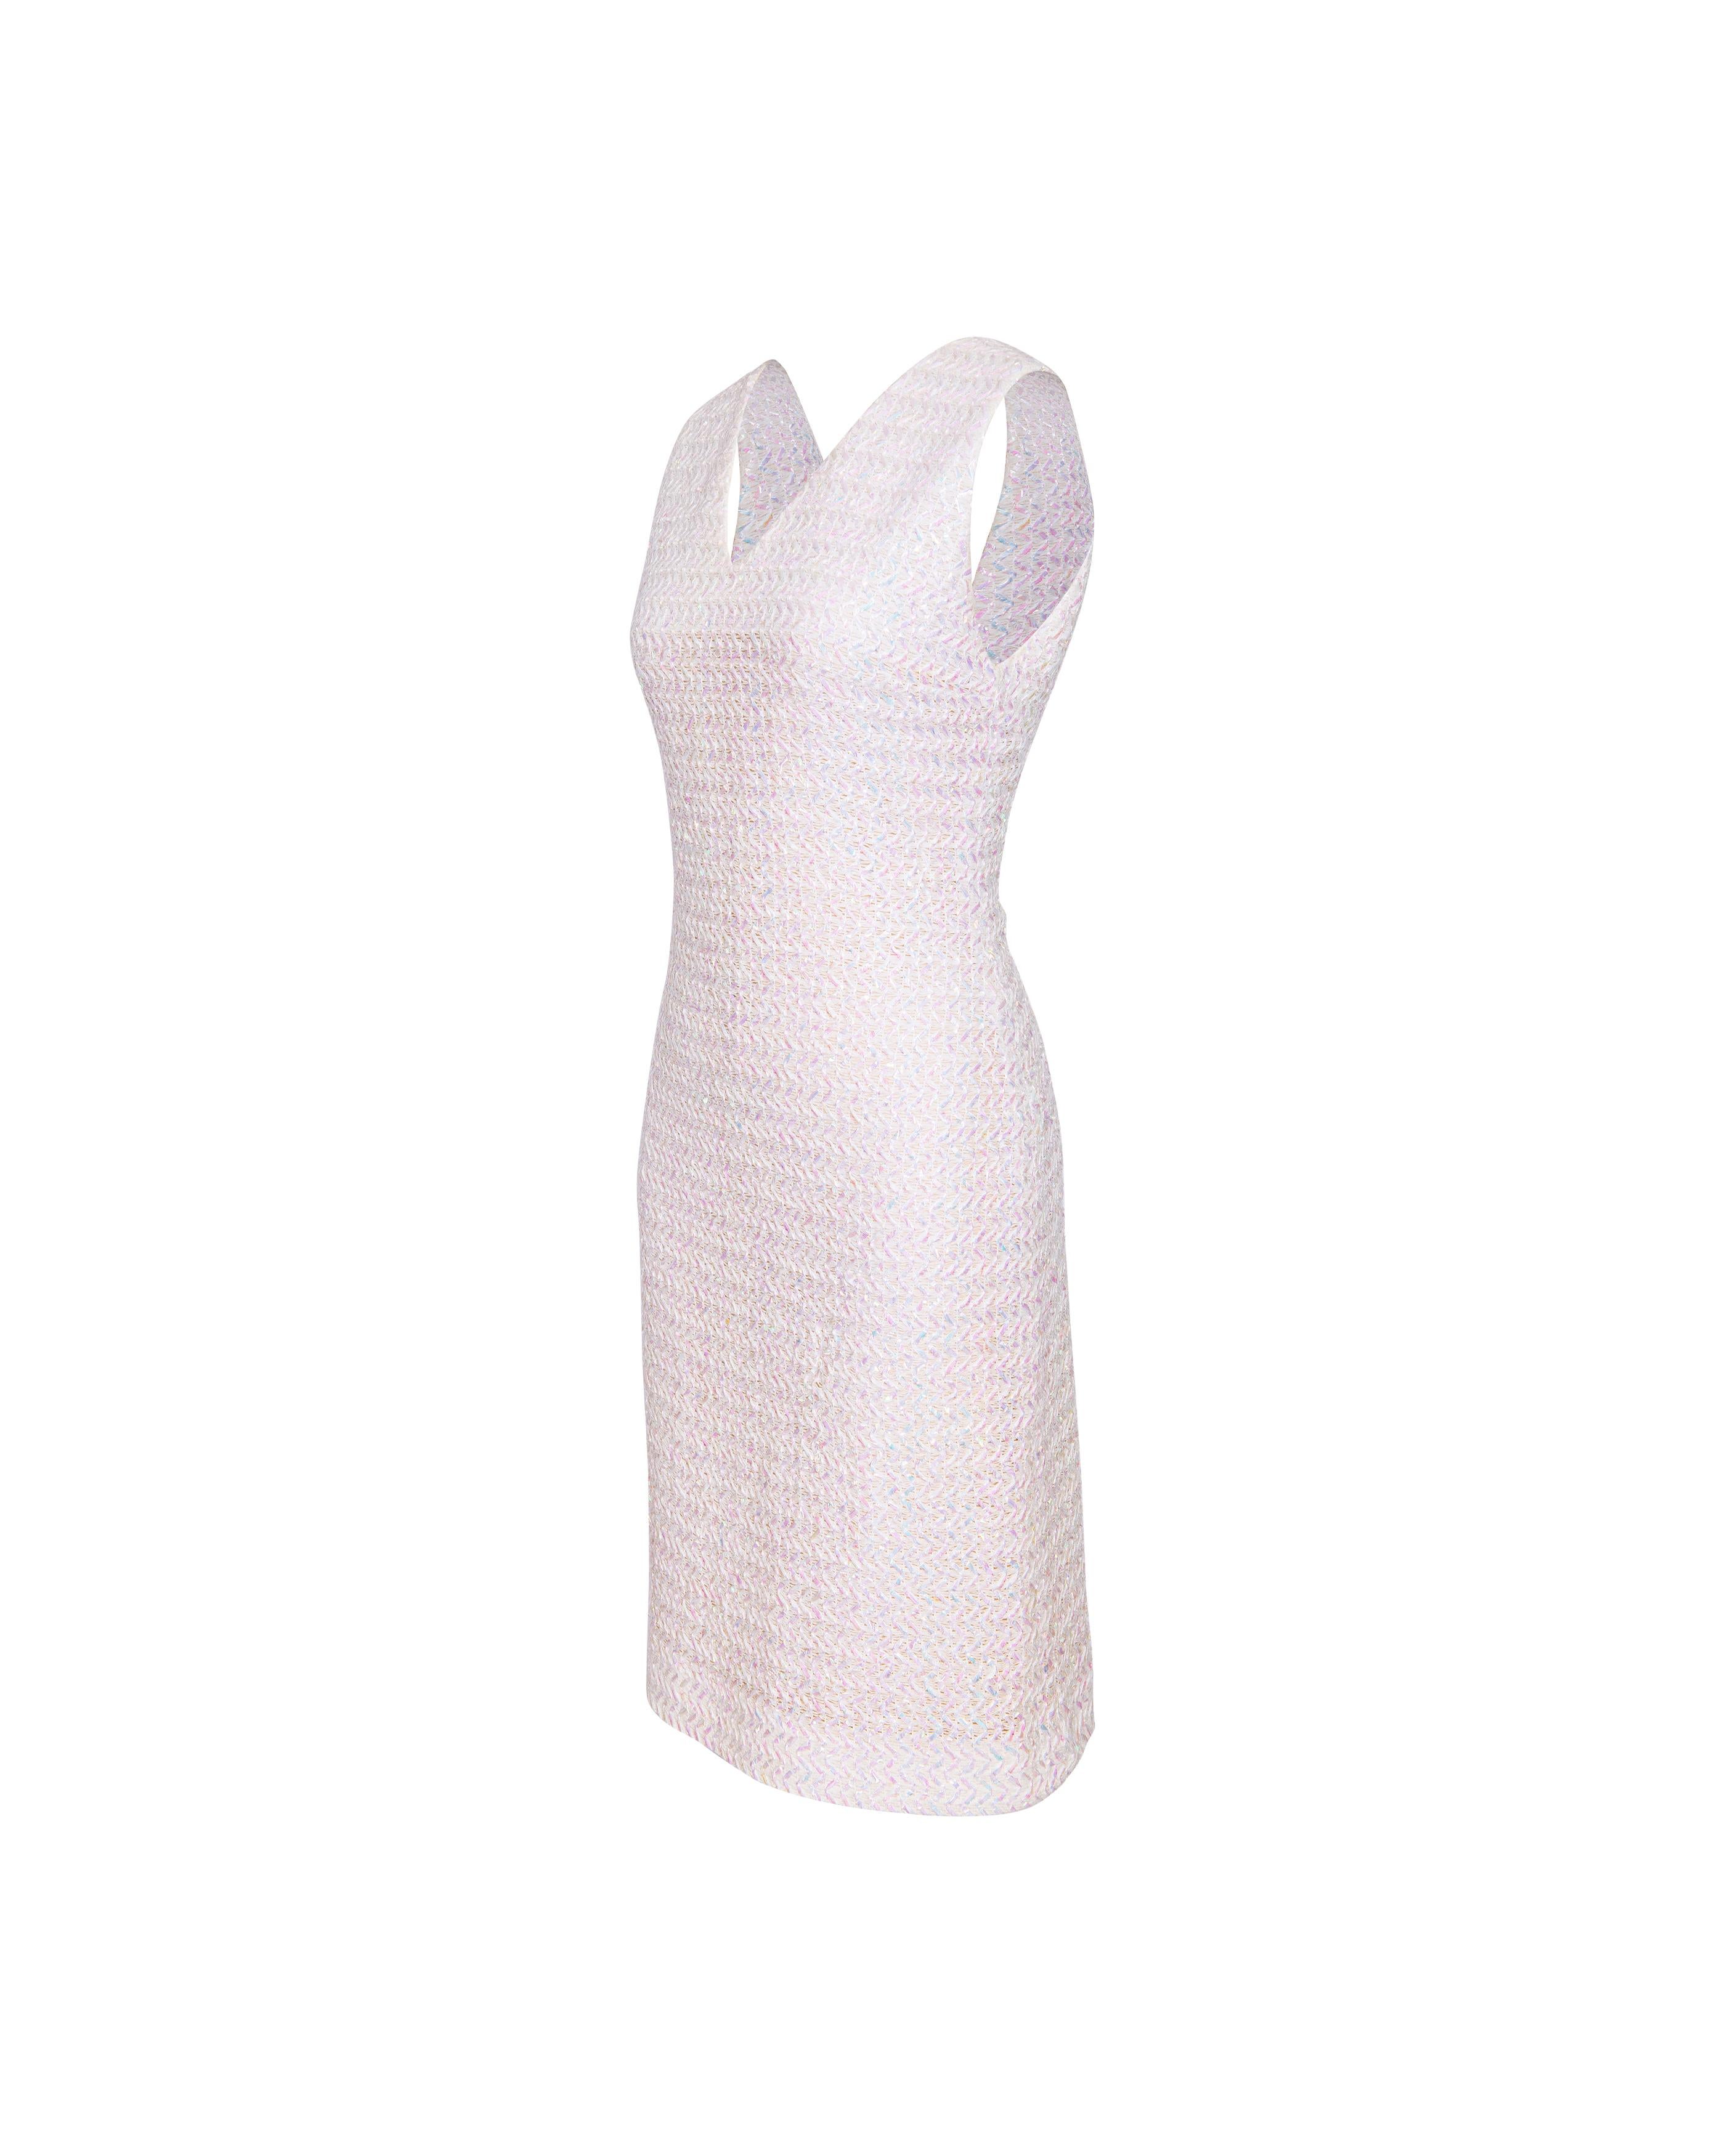 S/S 1992 Chanel by Karl Lagerfeld Metallic Above-Knee Sheath Dress In Good Condition For Sale In North Hollywood, CA